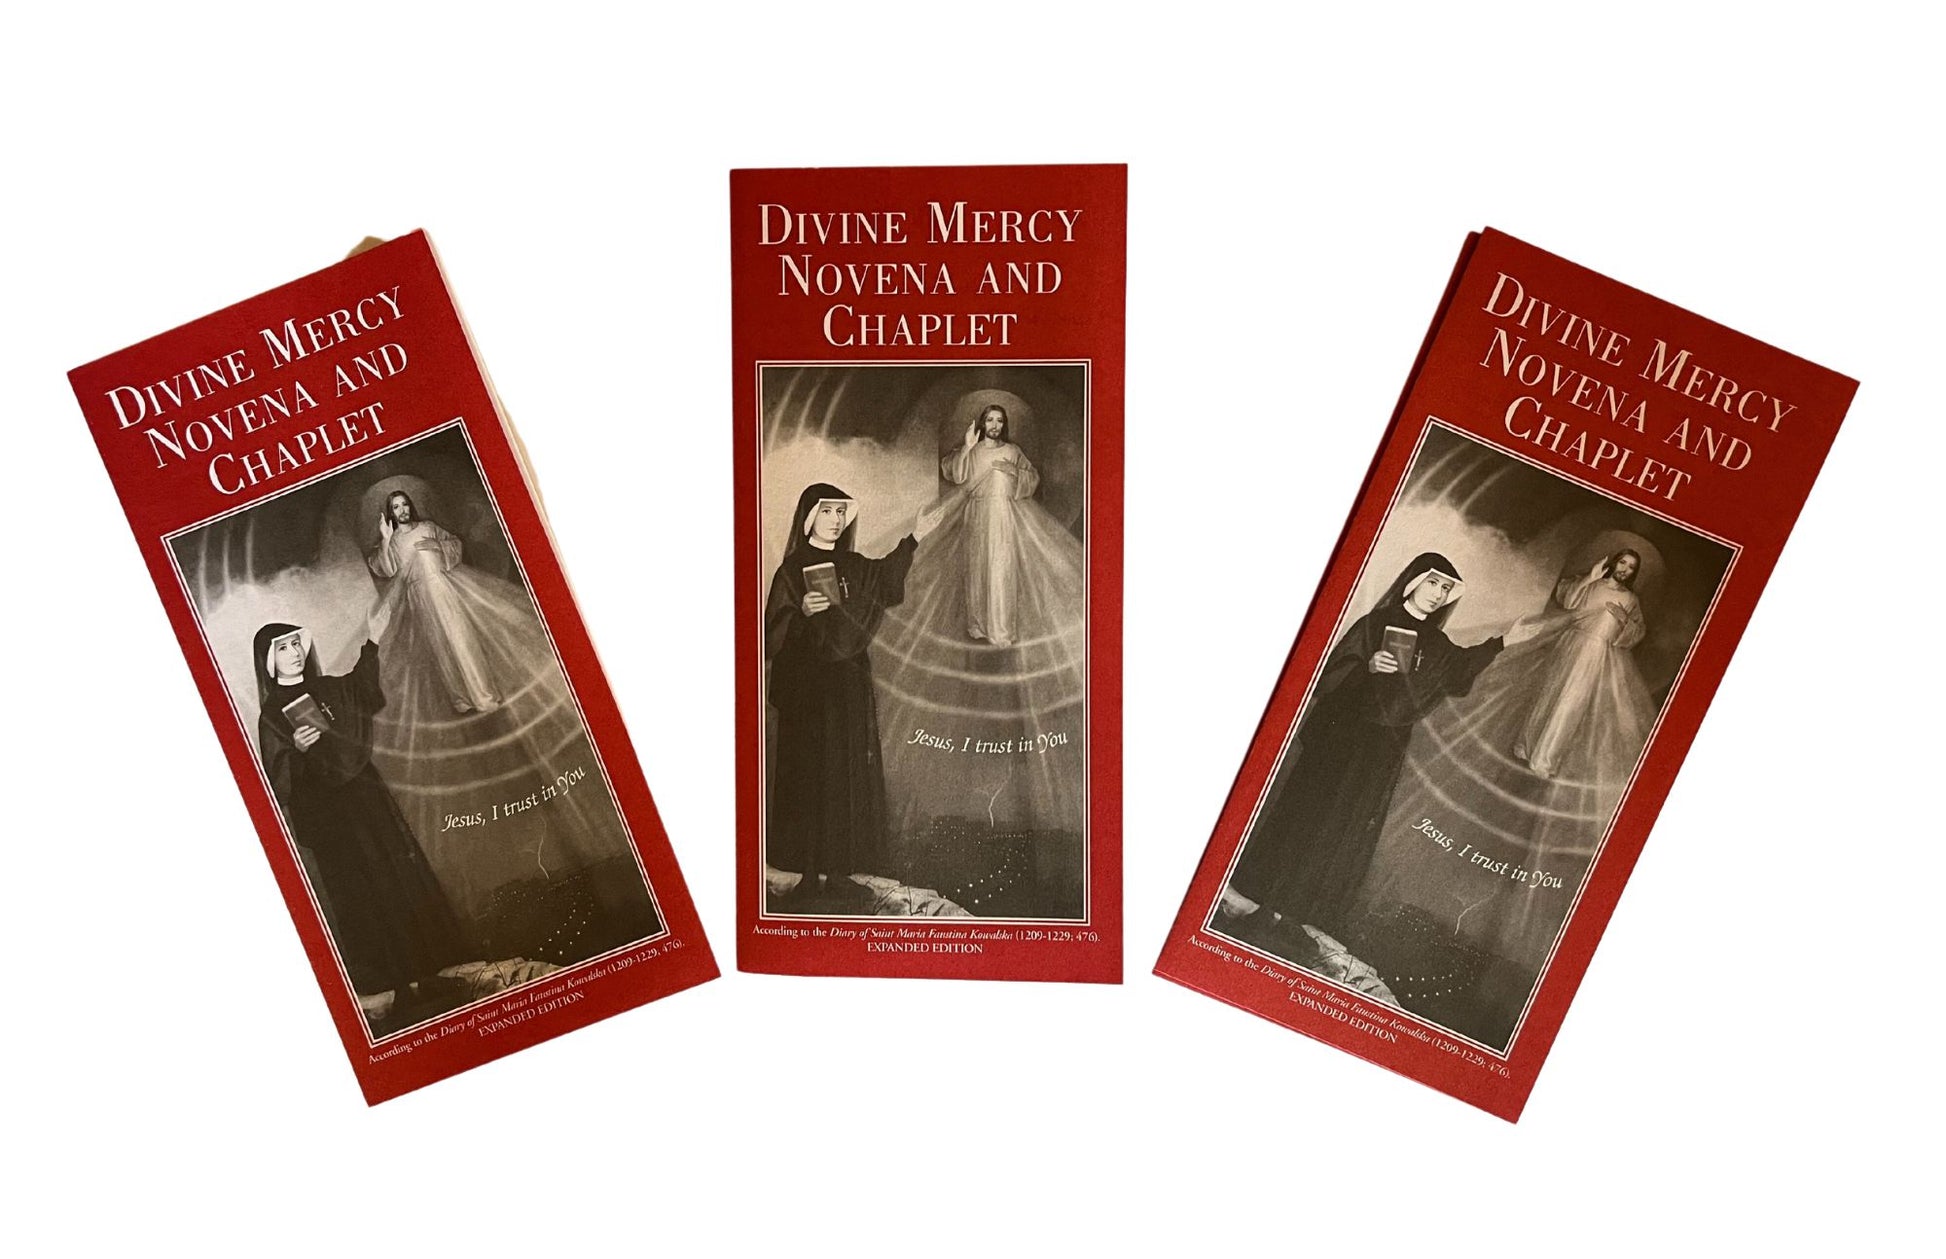 Divine Mercy Novena and Chaplet - Bob and Penny Lord